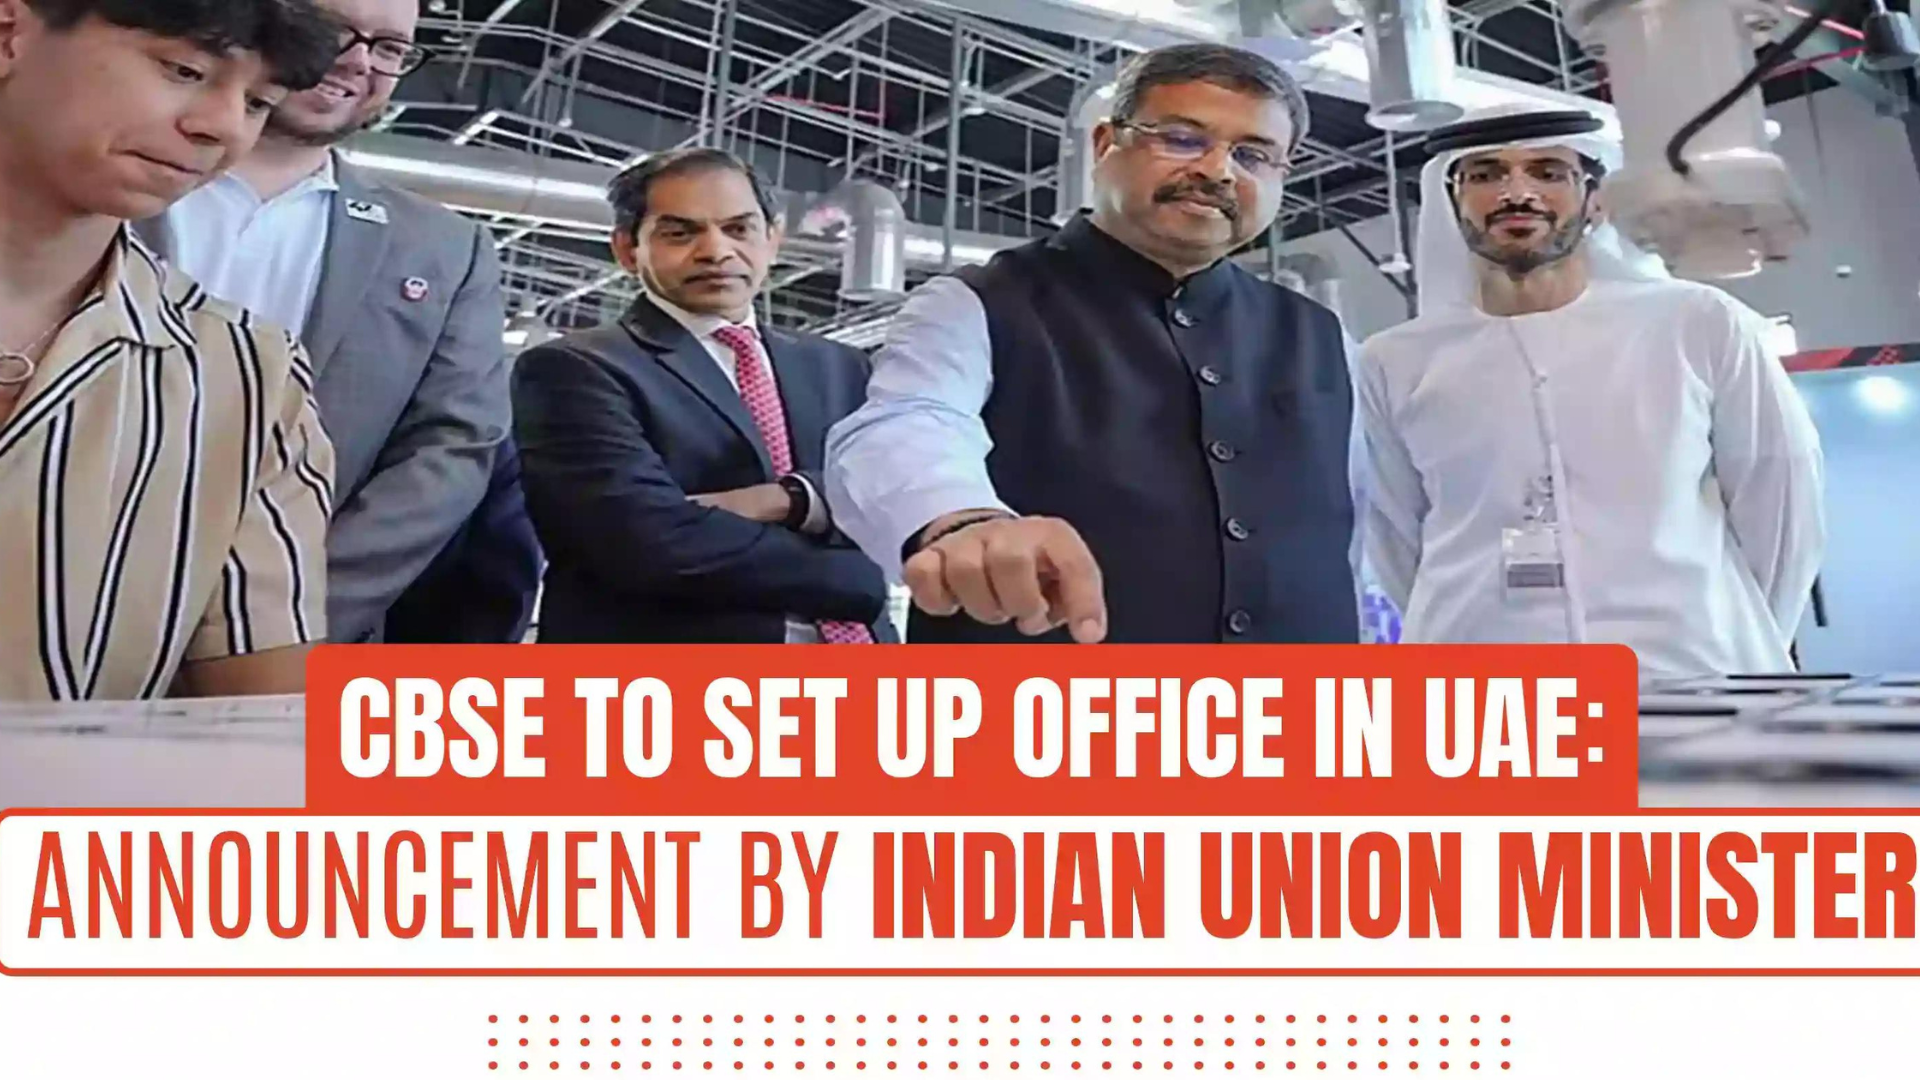 New CBSE Regional Office in UAE announced by the Union Minister of Education,Govt. of India